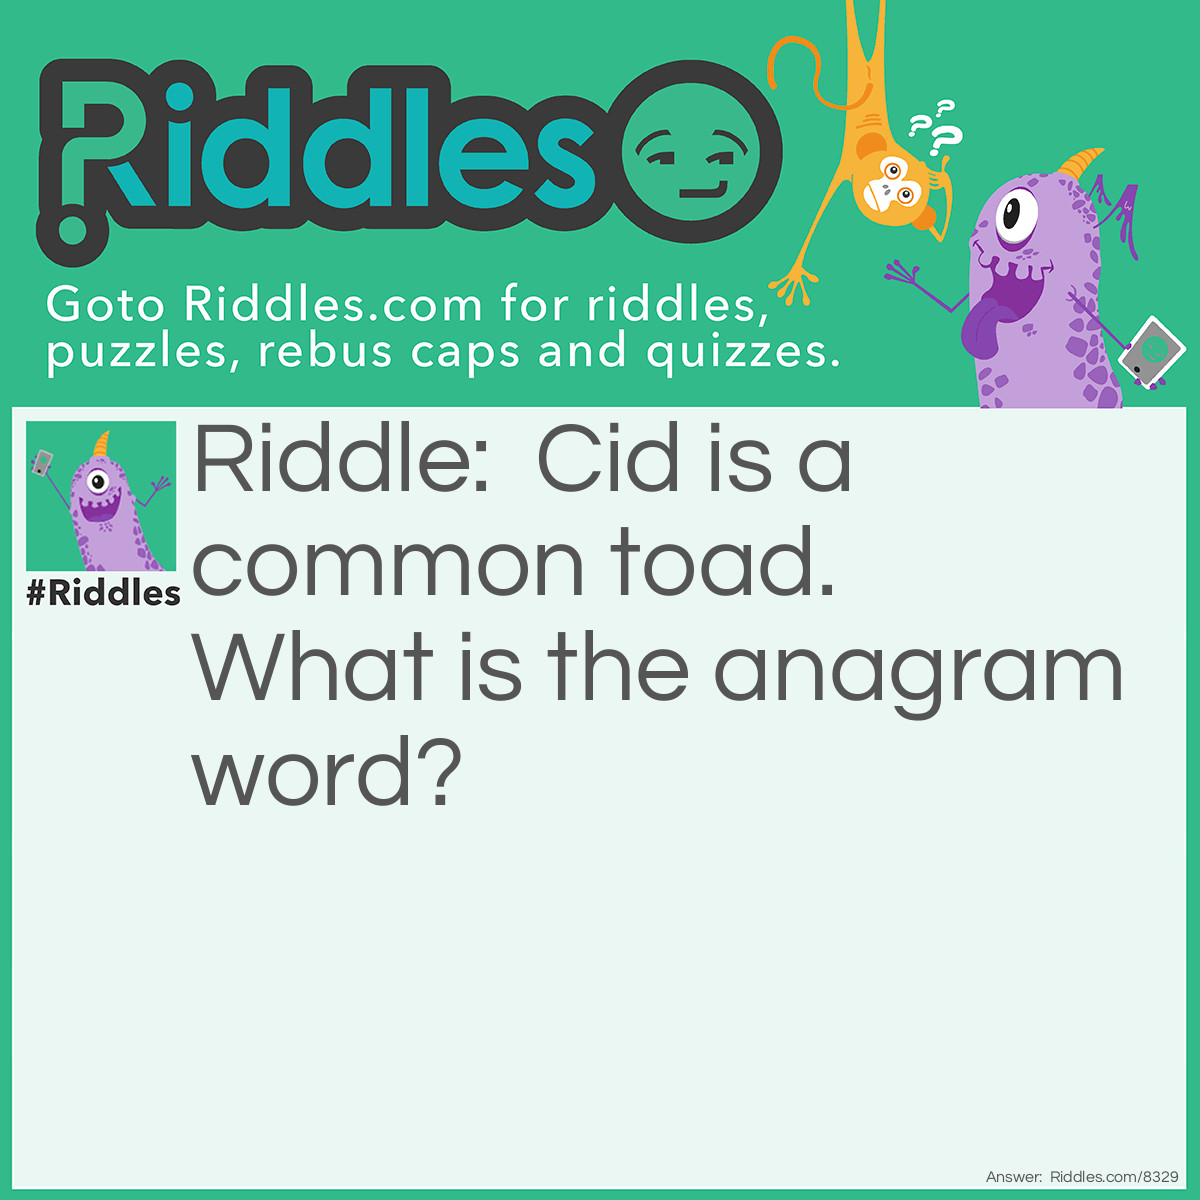 Riddle: Cid is a common toad.  What is the anagrammed  word? Answer: Disaccommodation.